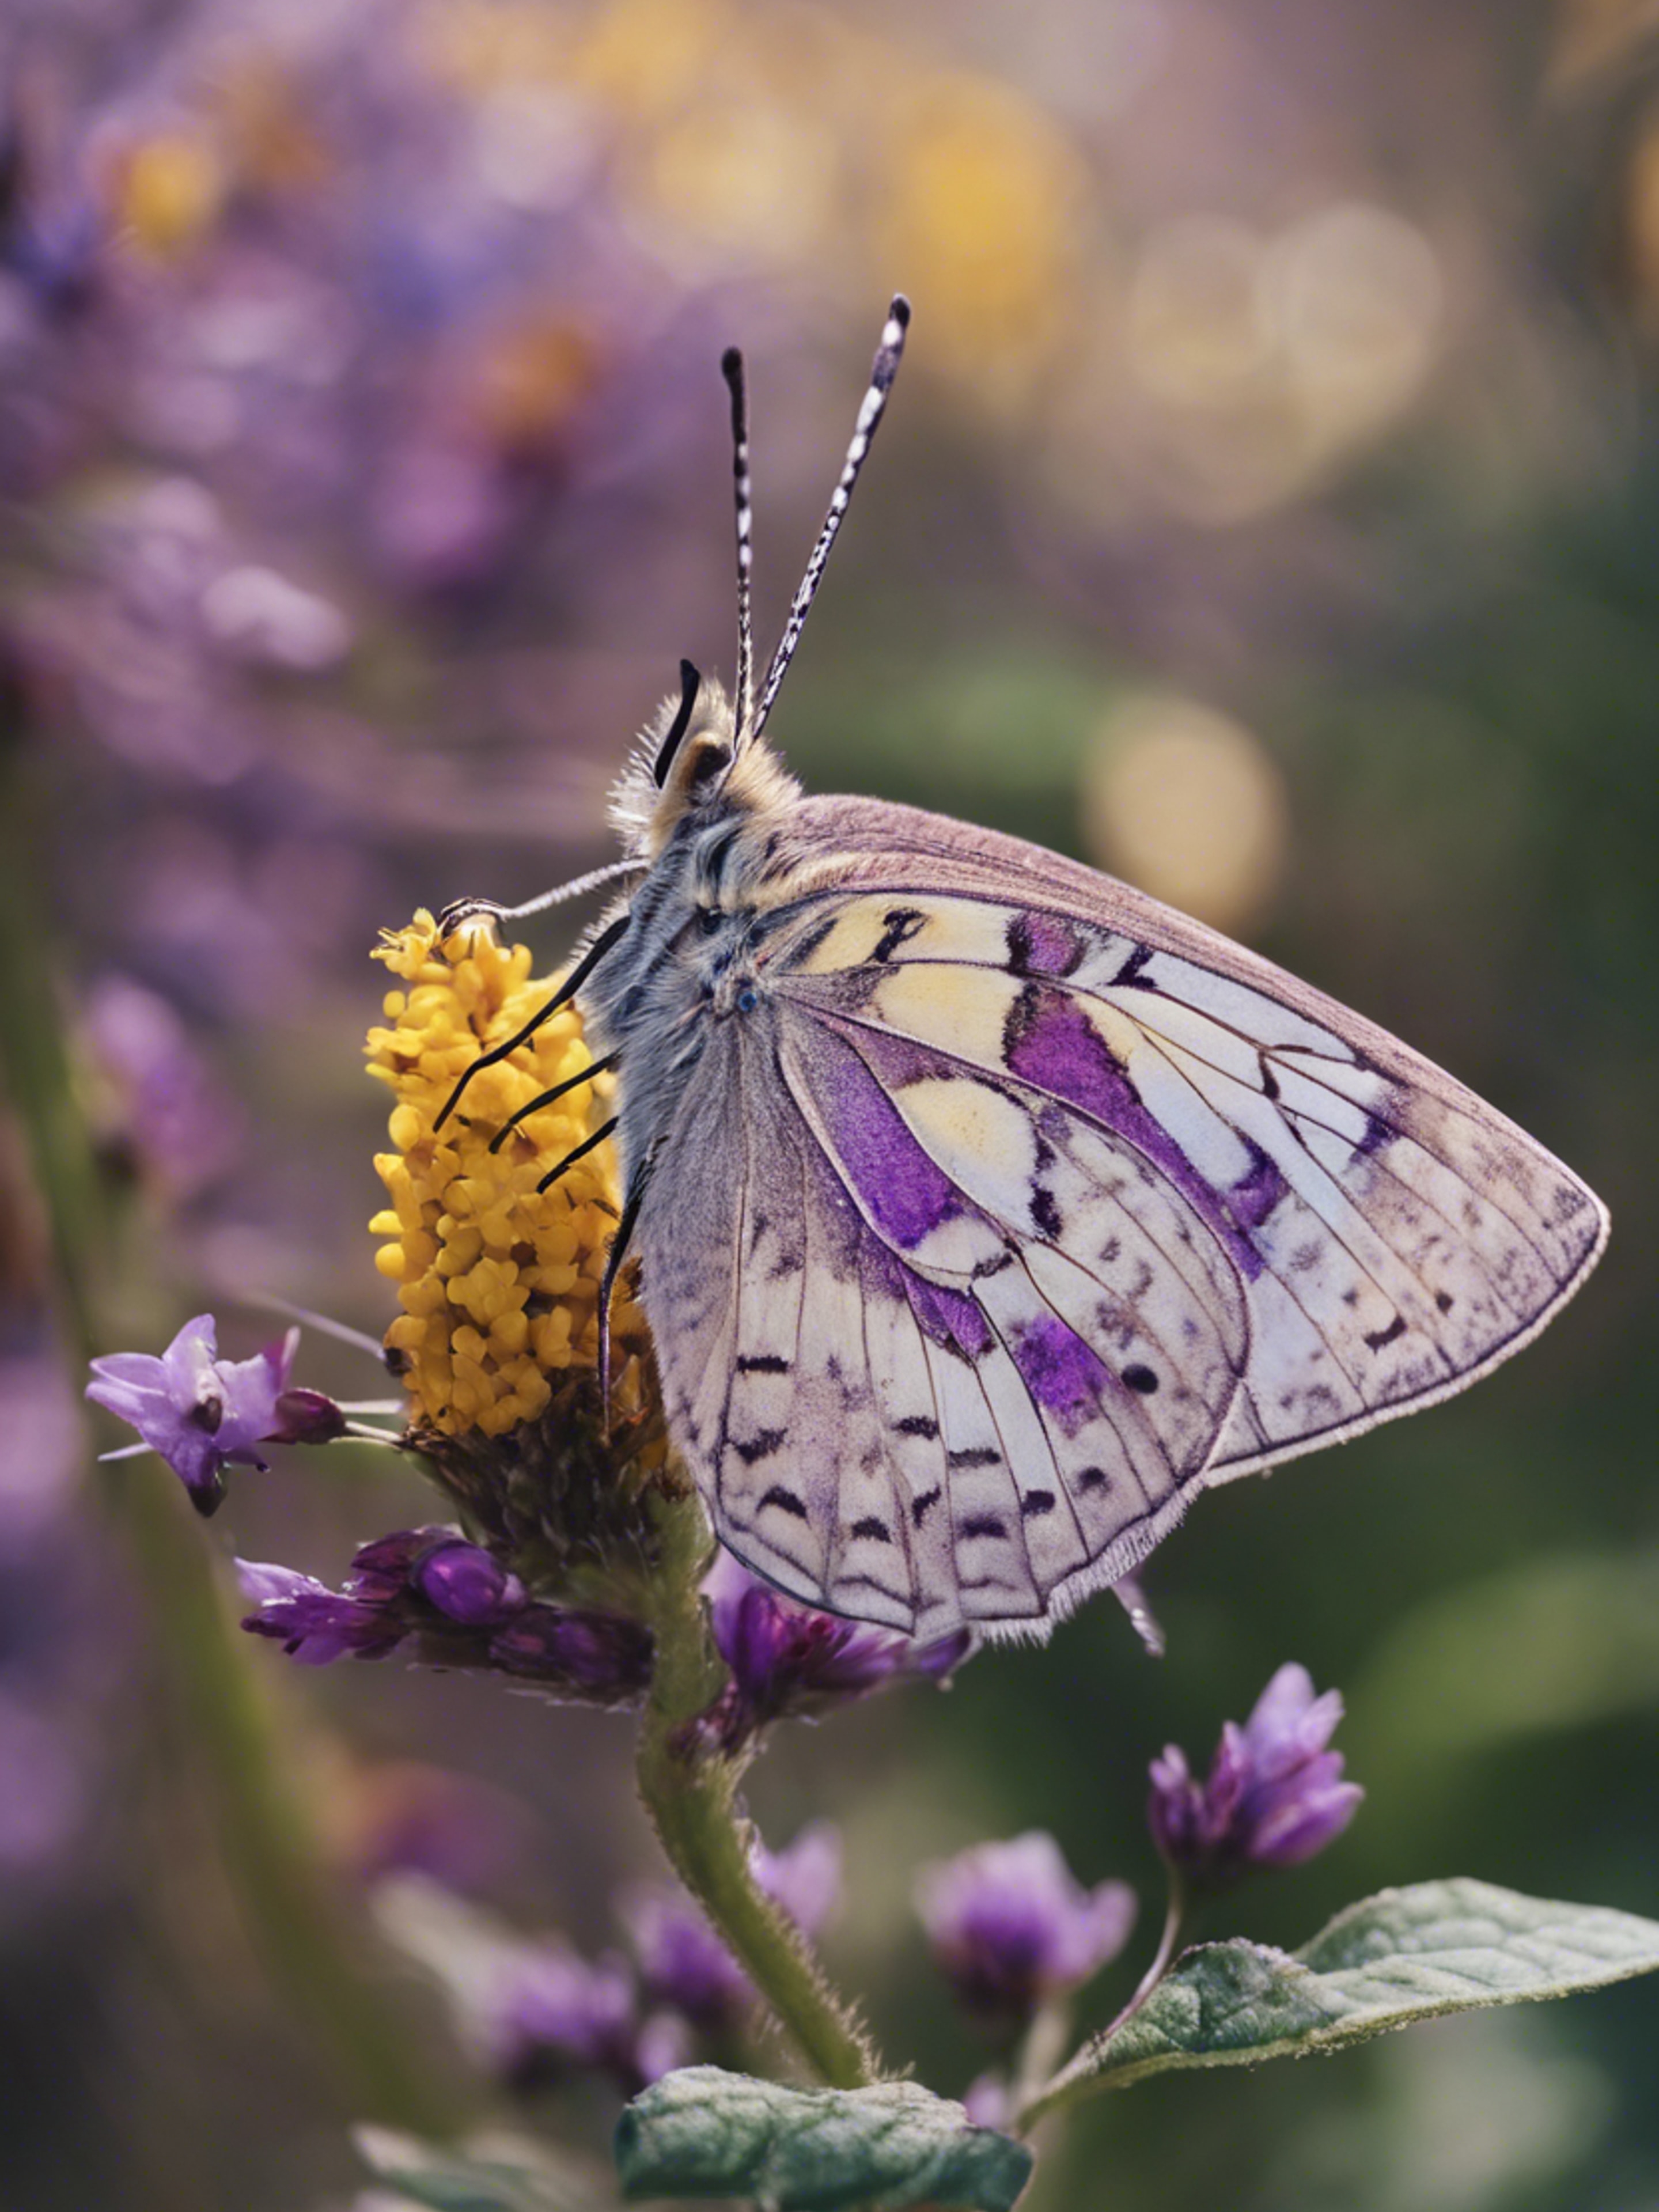 A beautiful butterfly with detailed purple and yellow wings resting on a blooming flower. Tapeta na zeď[3e976ae7be264a5da695]